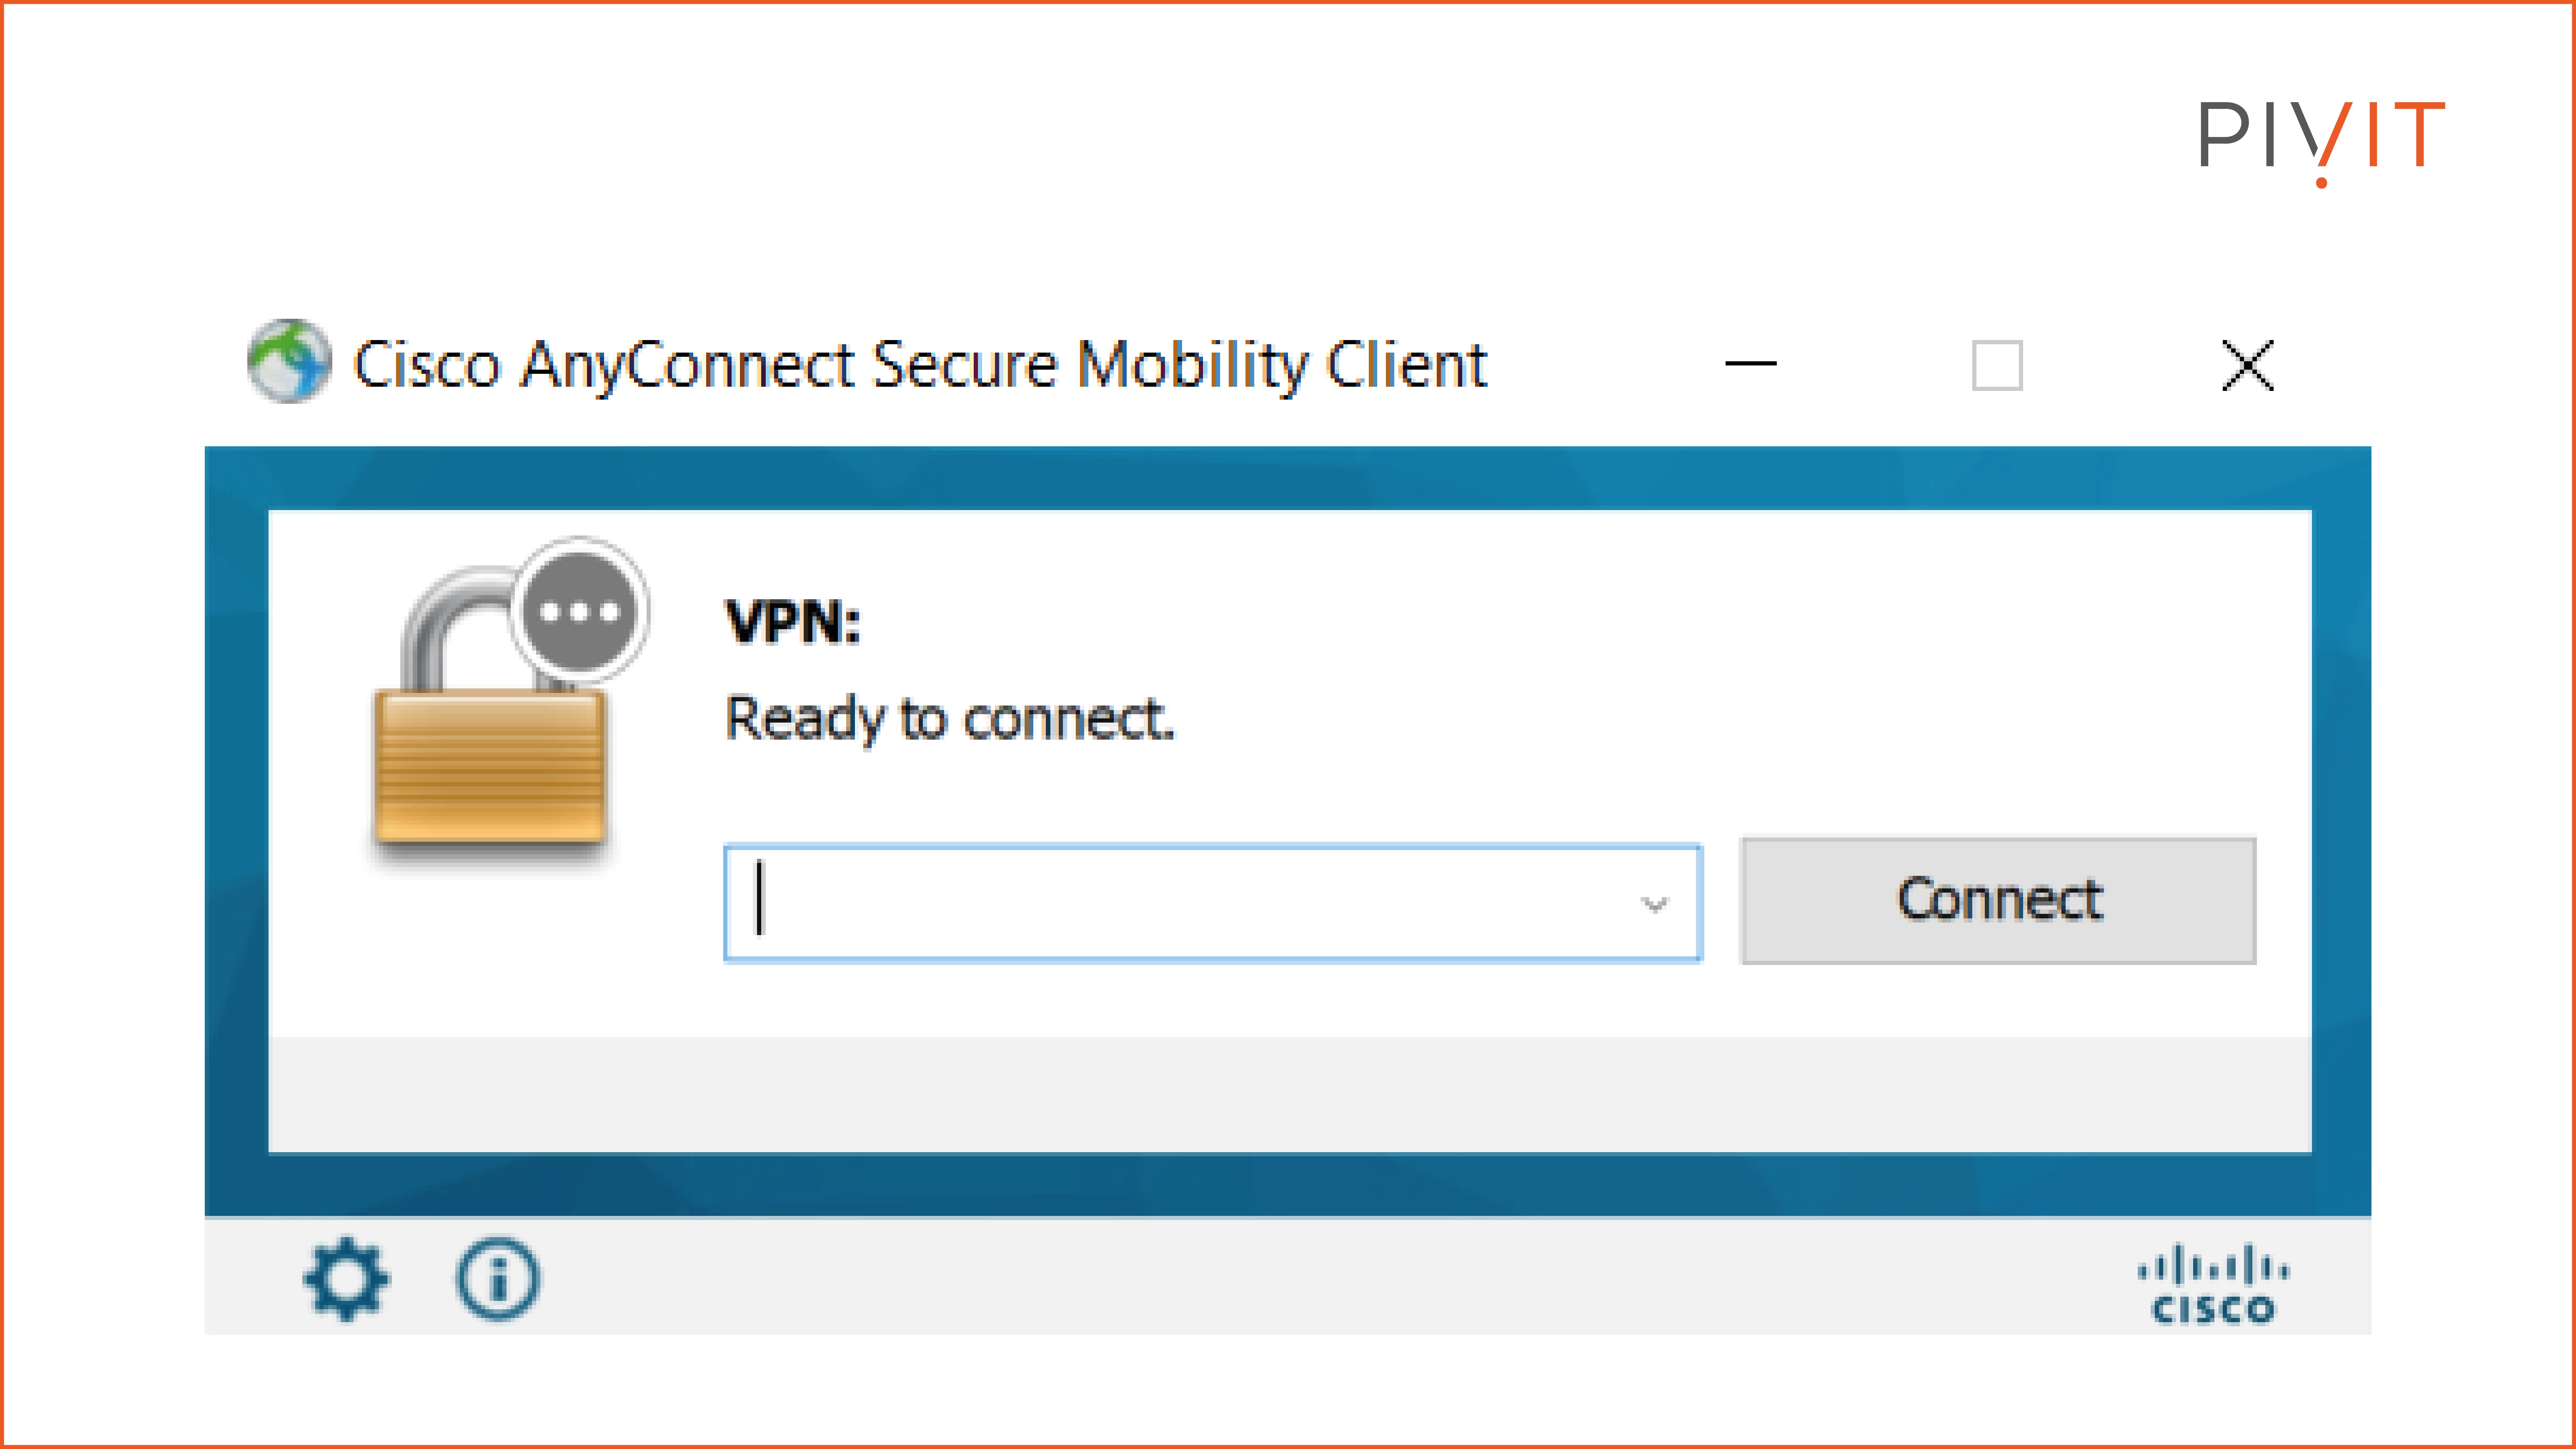 Cisco AnyConnect Secure Mobility Client